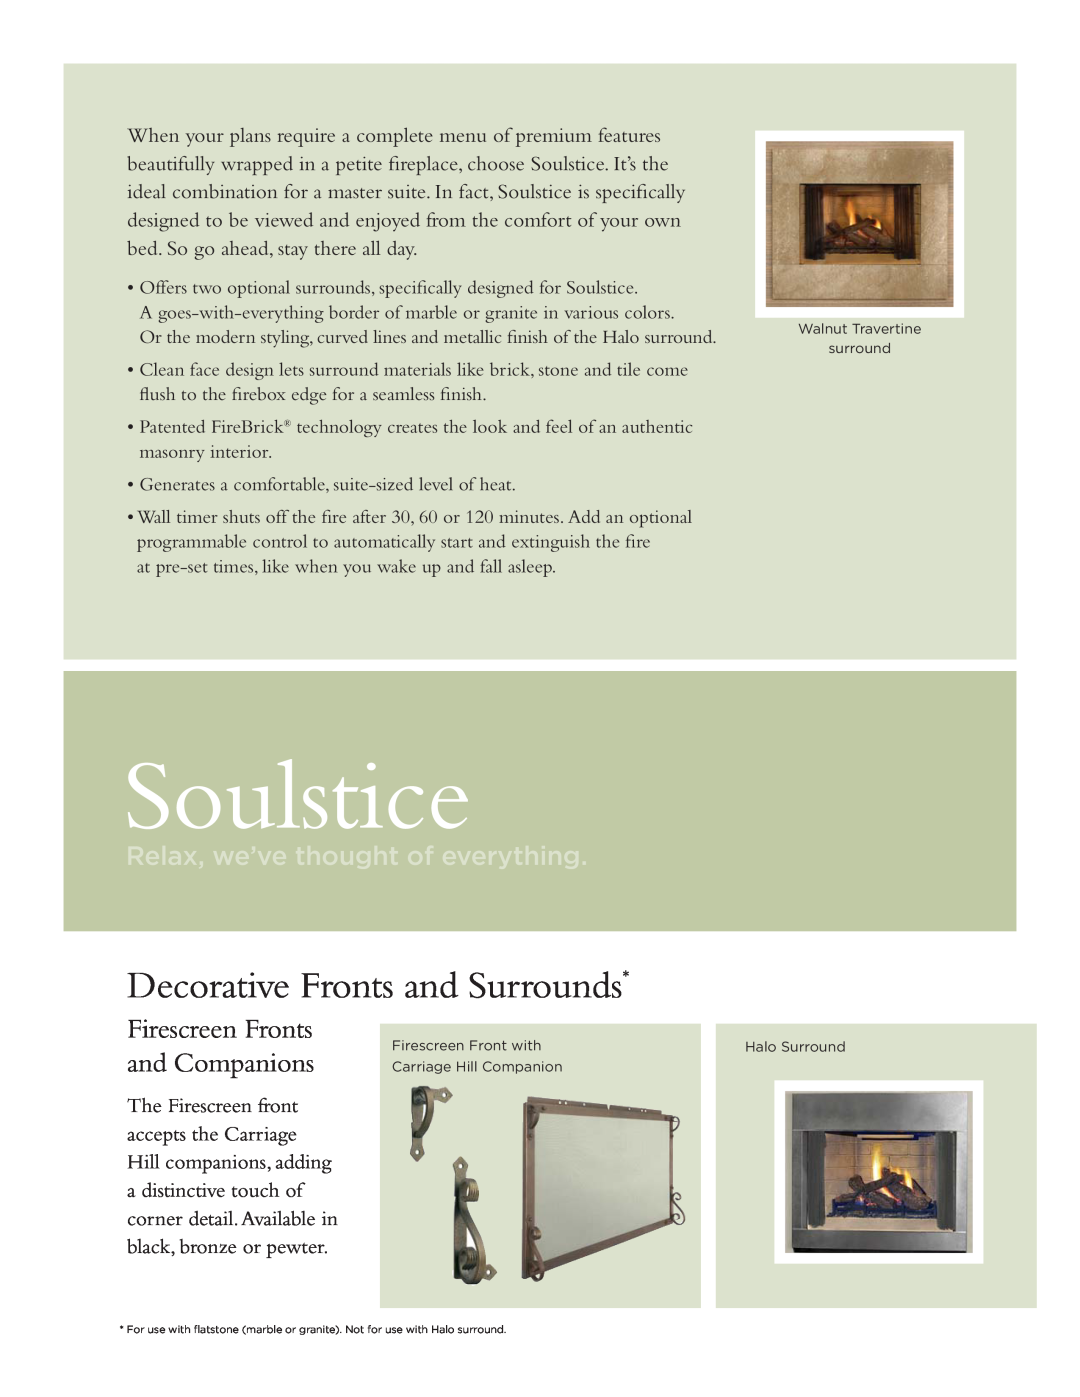 Hearth and Home Technologies SOULSTICE manual Soulstice, Decorative Fronts and Surrounds, Firescreen Fronts and Companions 